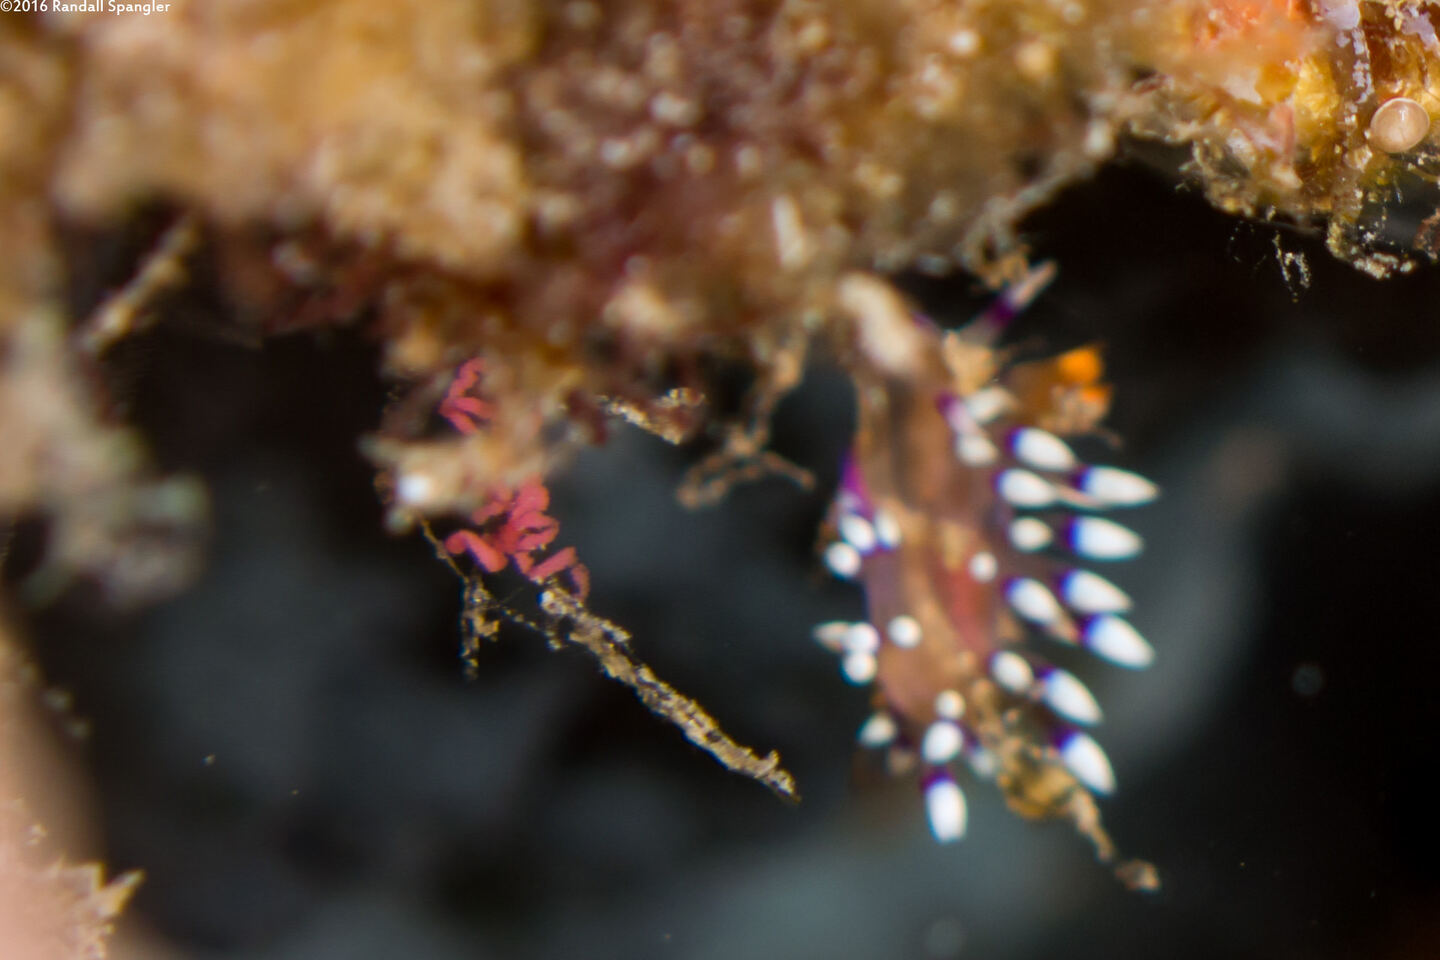 Coryphellina exoptata (Desirable Flabellina); The little pink sausages to the left are its eggs